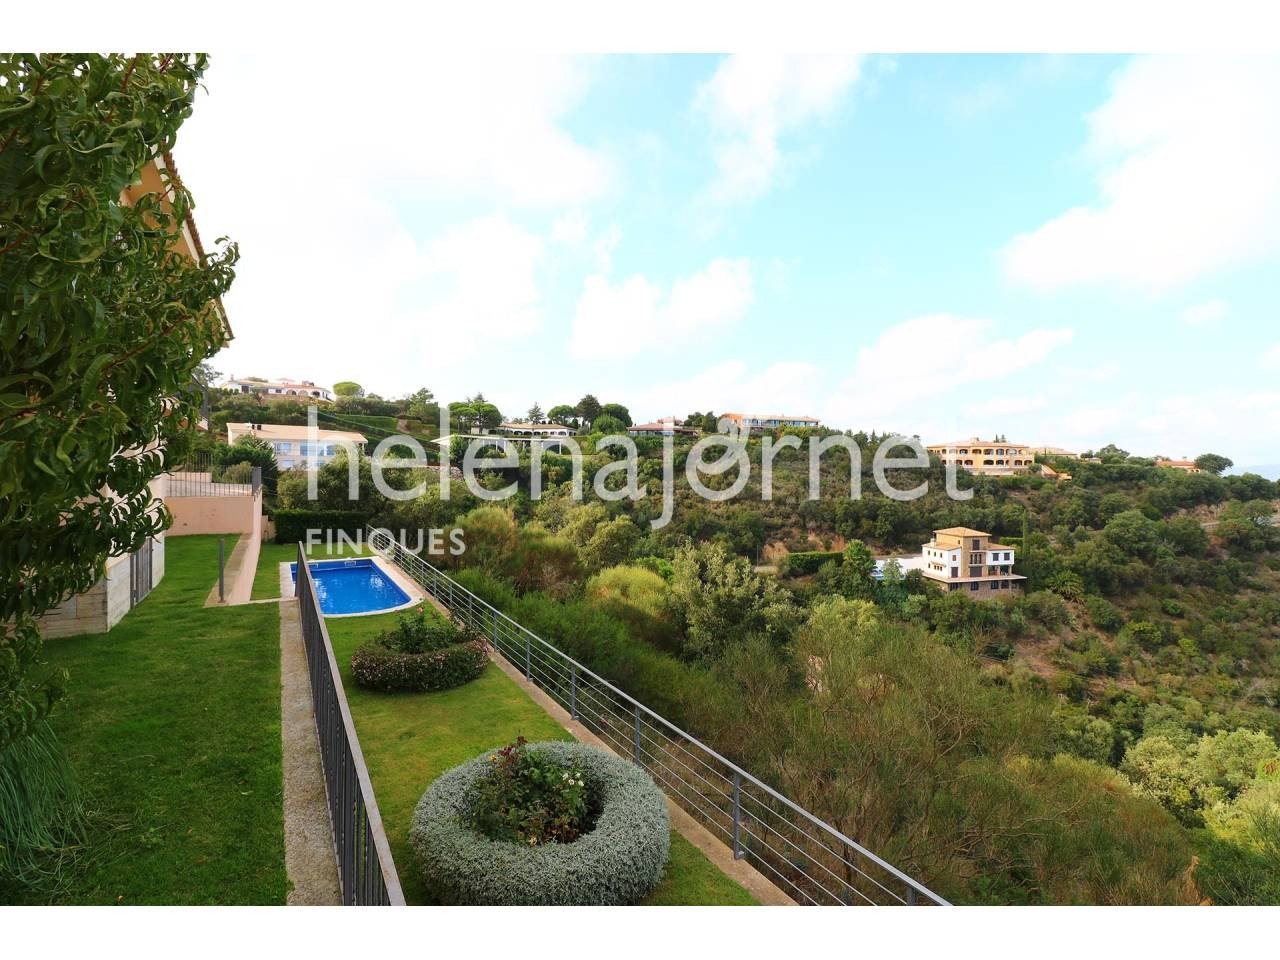 House with a beautiful garden and a pool in the Mas Nou residential area - 1512